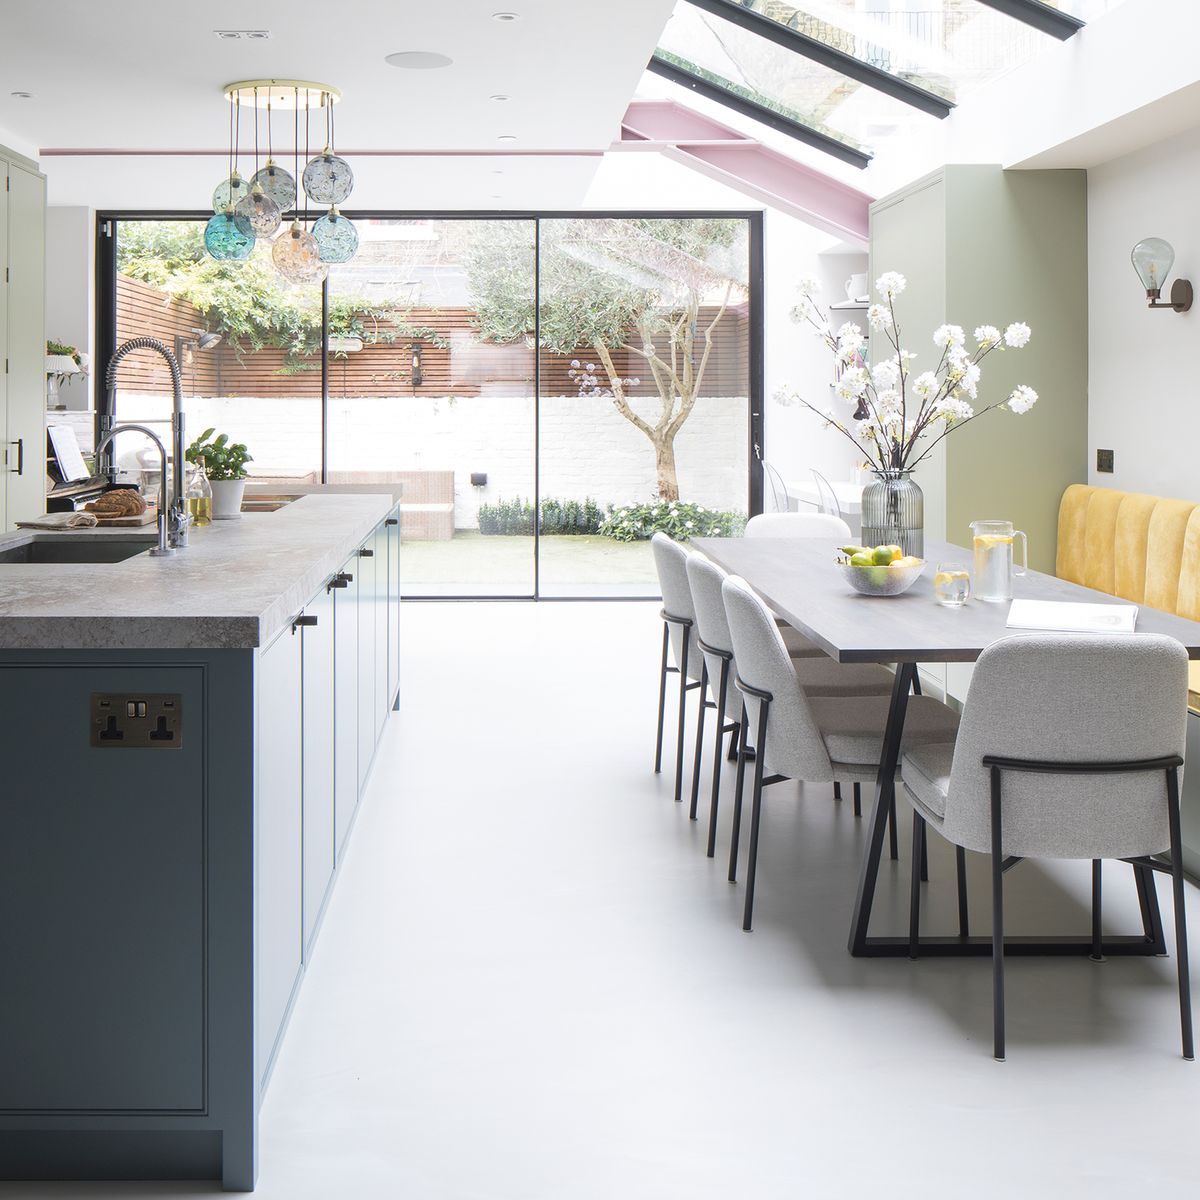 This renovated London Victorian terrace has family life at its heart